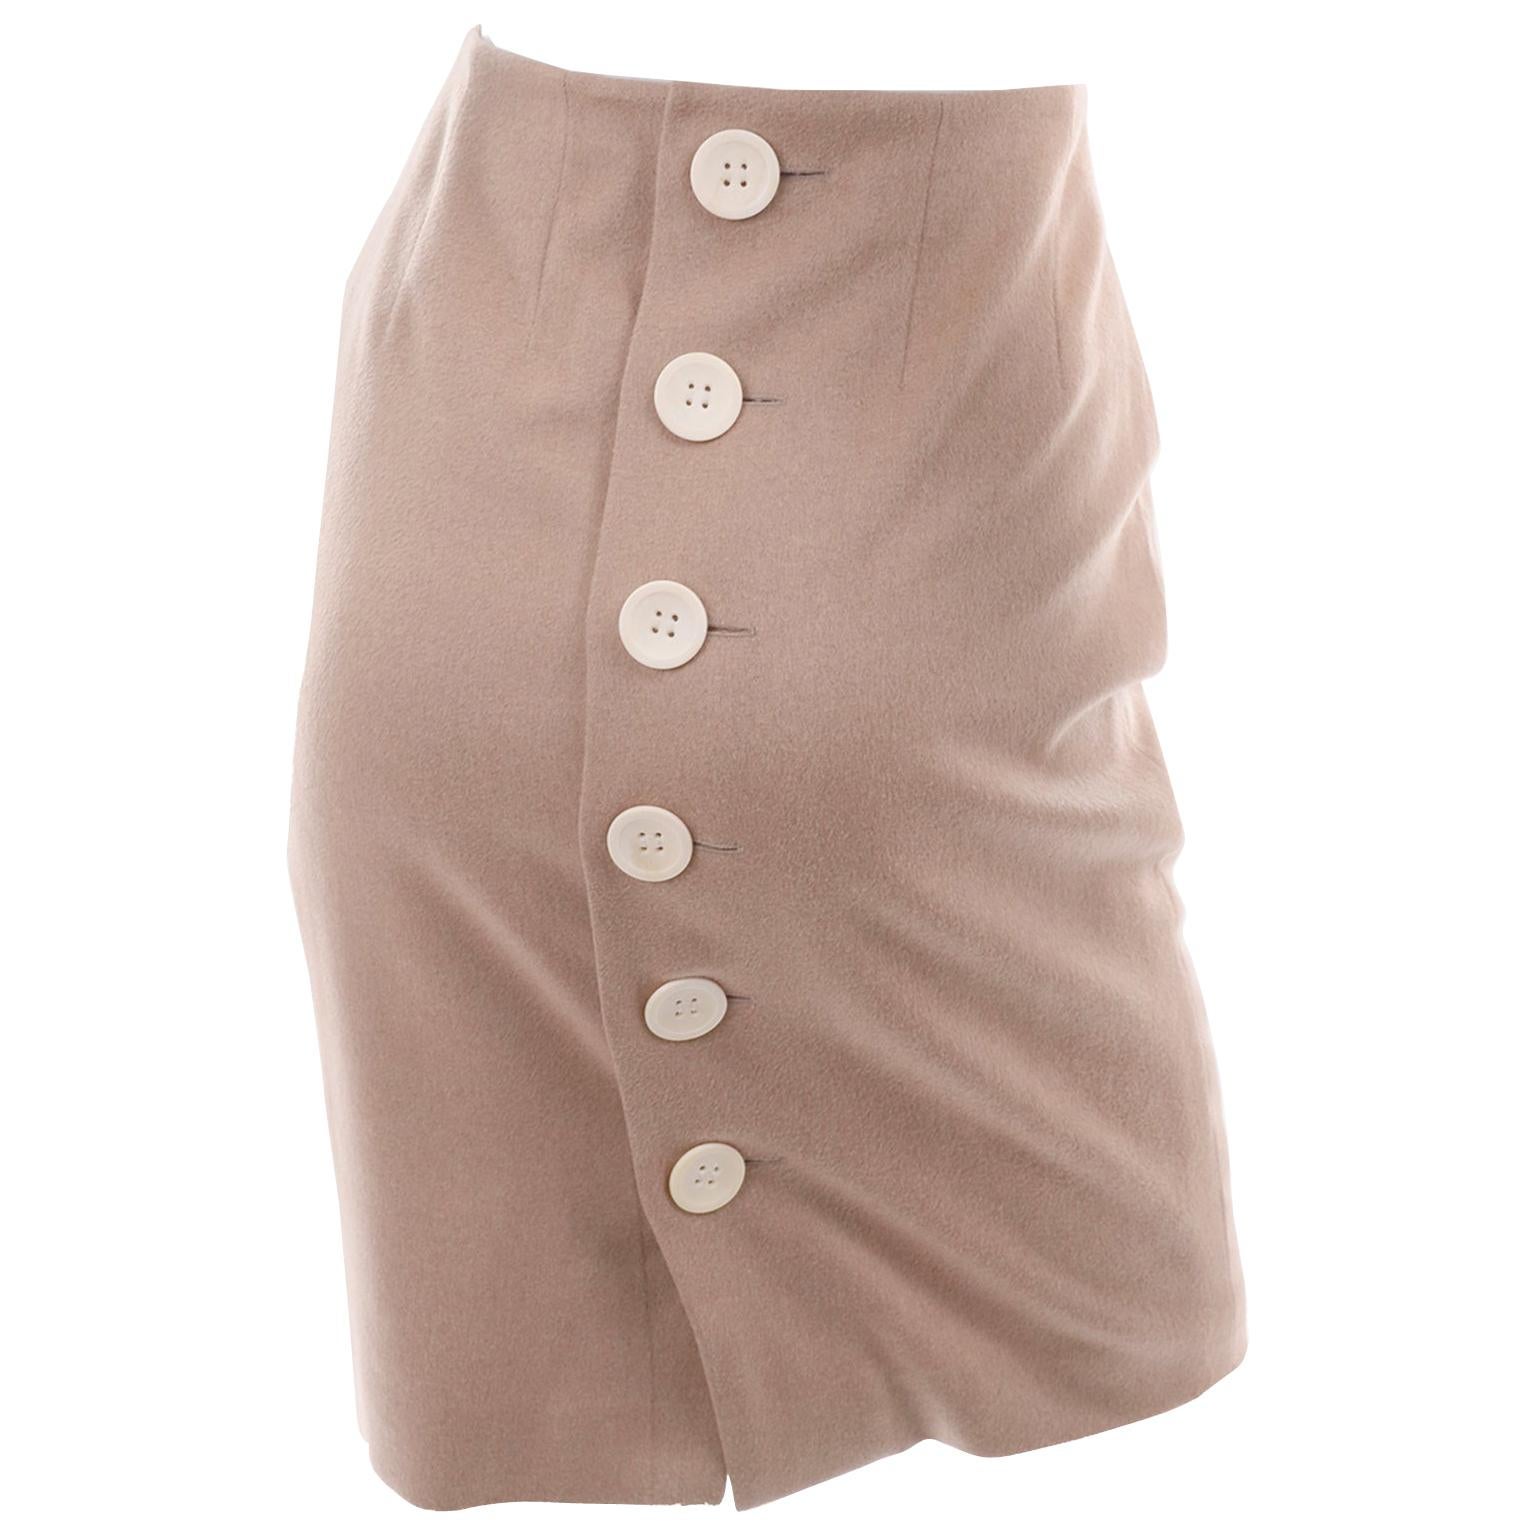 Christian Dior Paris Camel Pencil Skirt With Back Buttons & SIlk Lining Size 8 For Sale